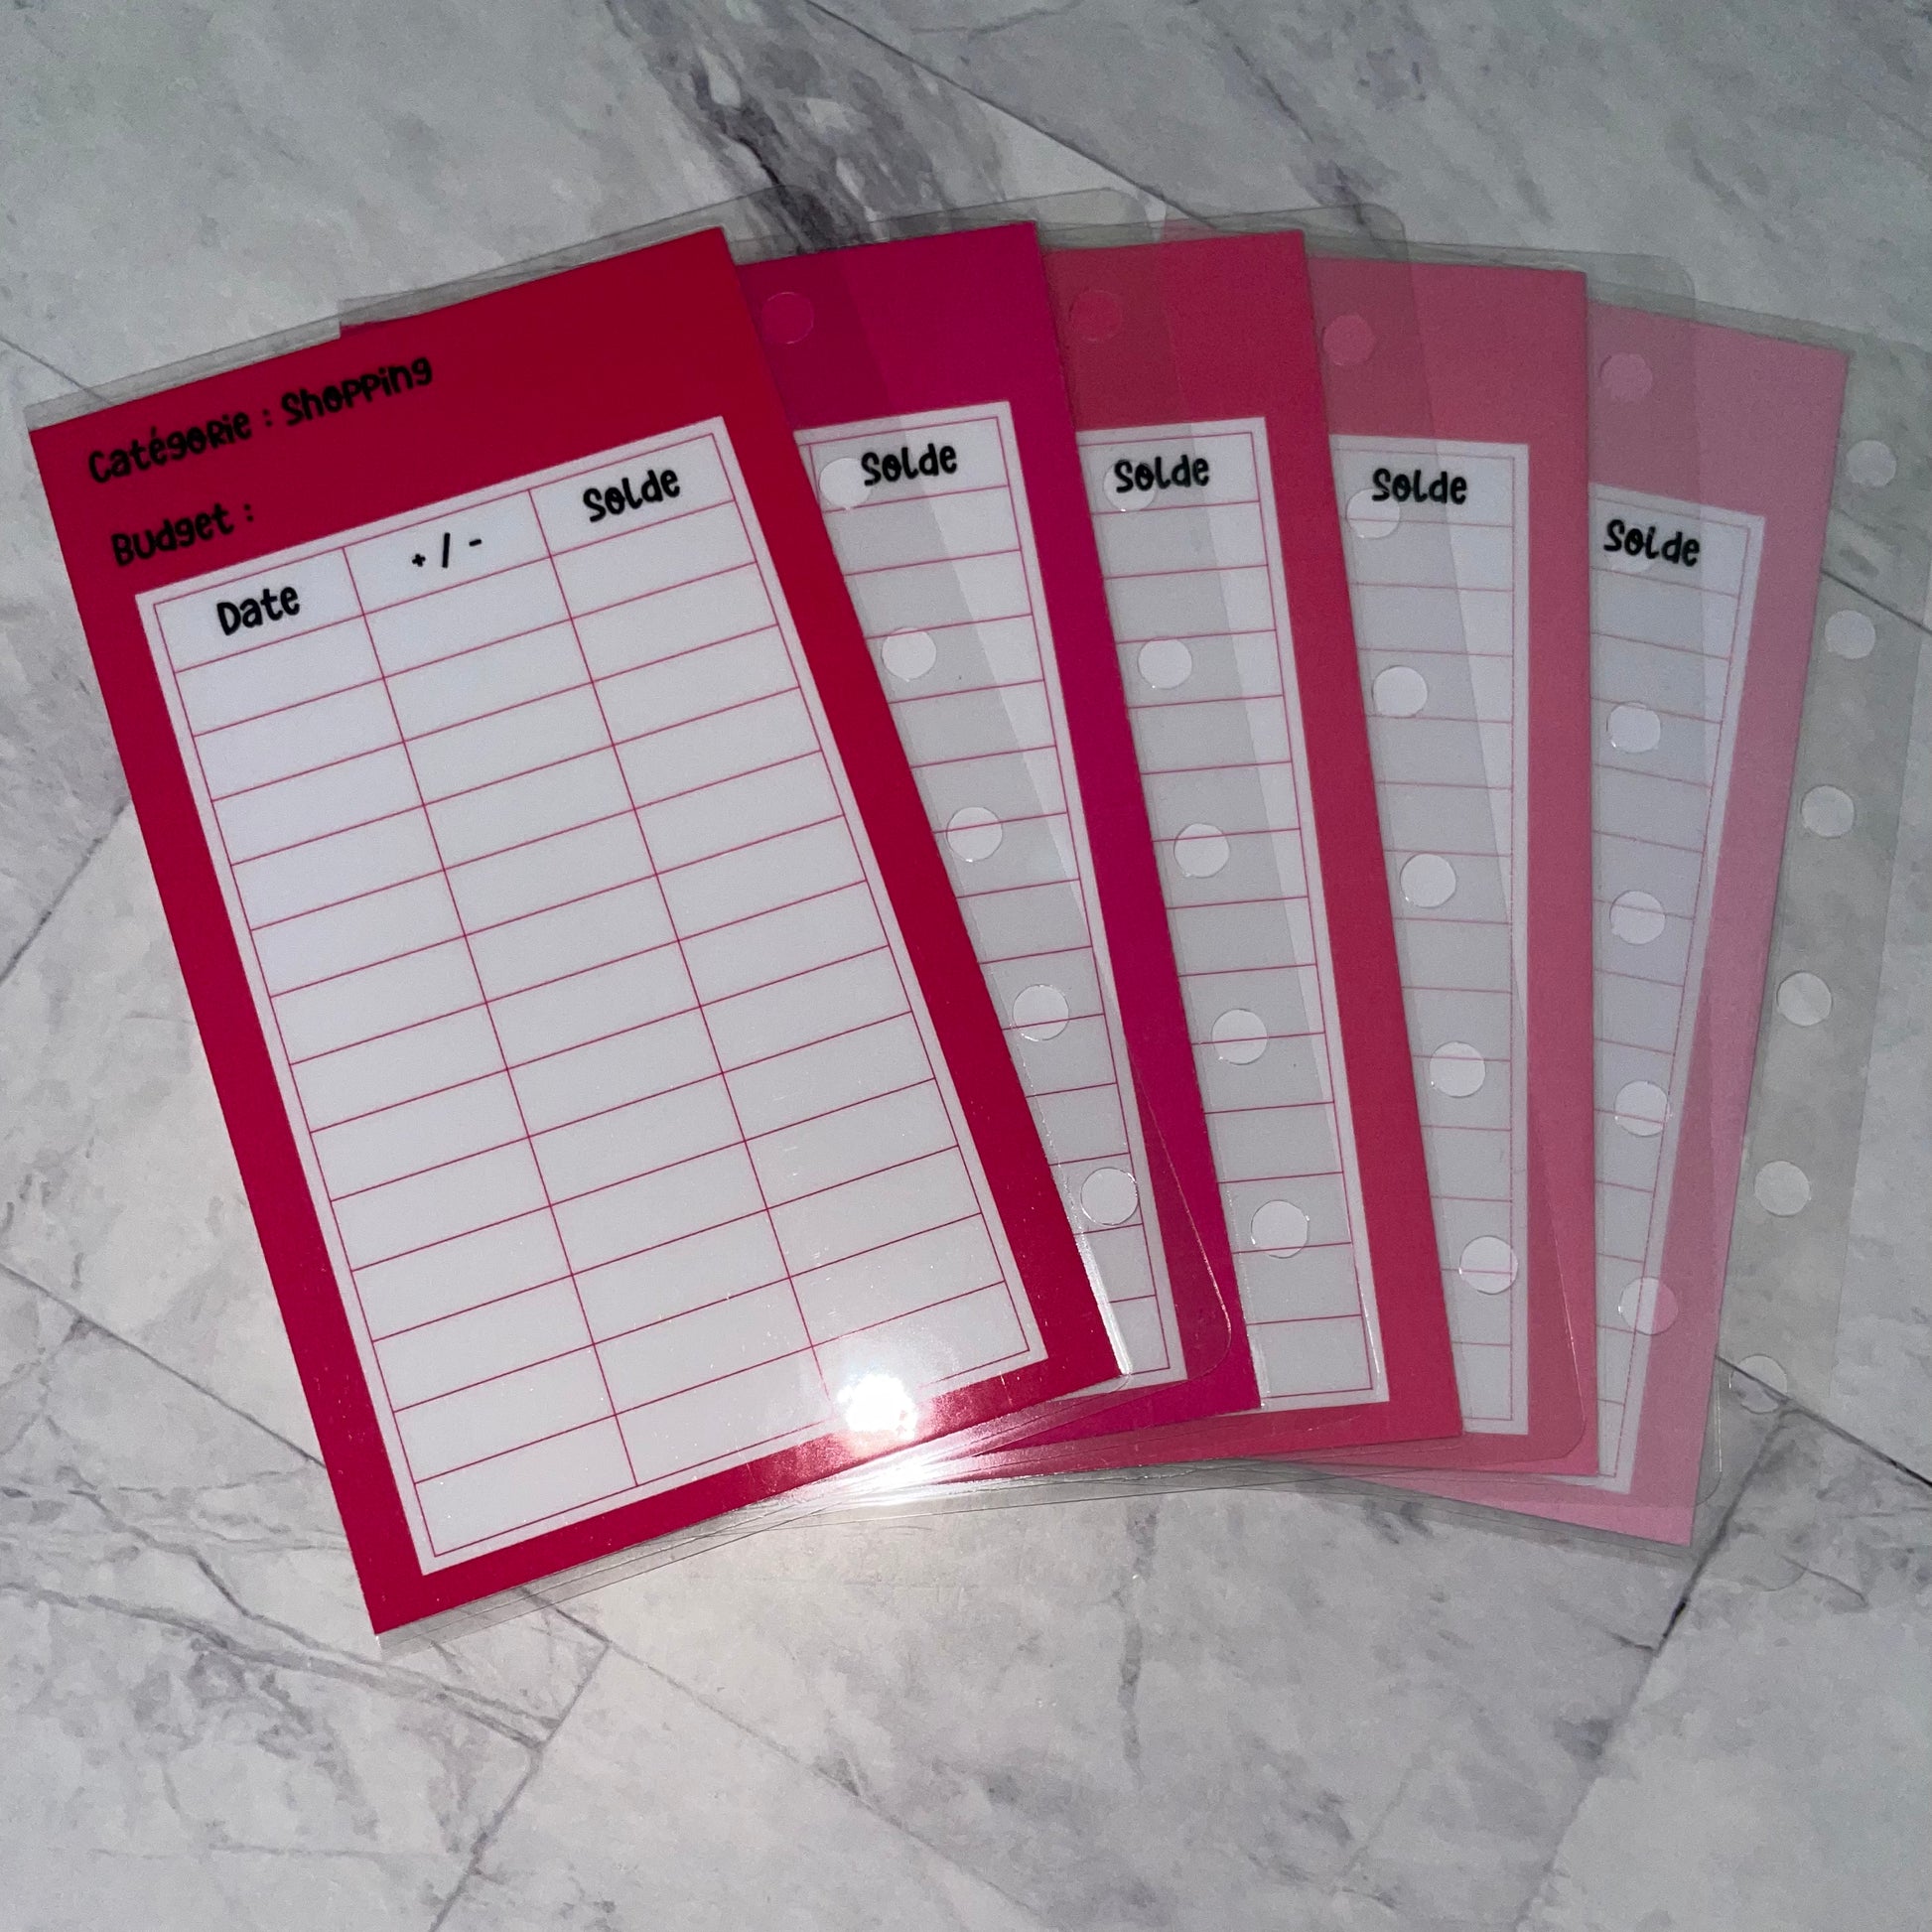 ENVELOPPES ZIP A5 – Budget-Papeterie